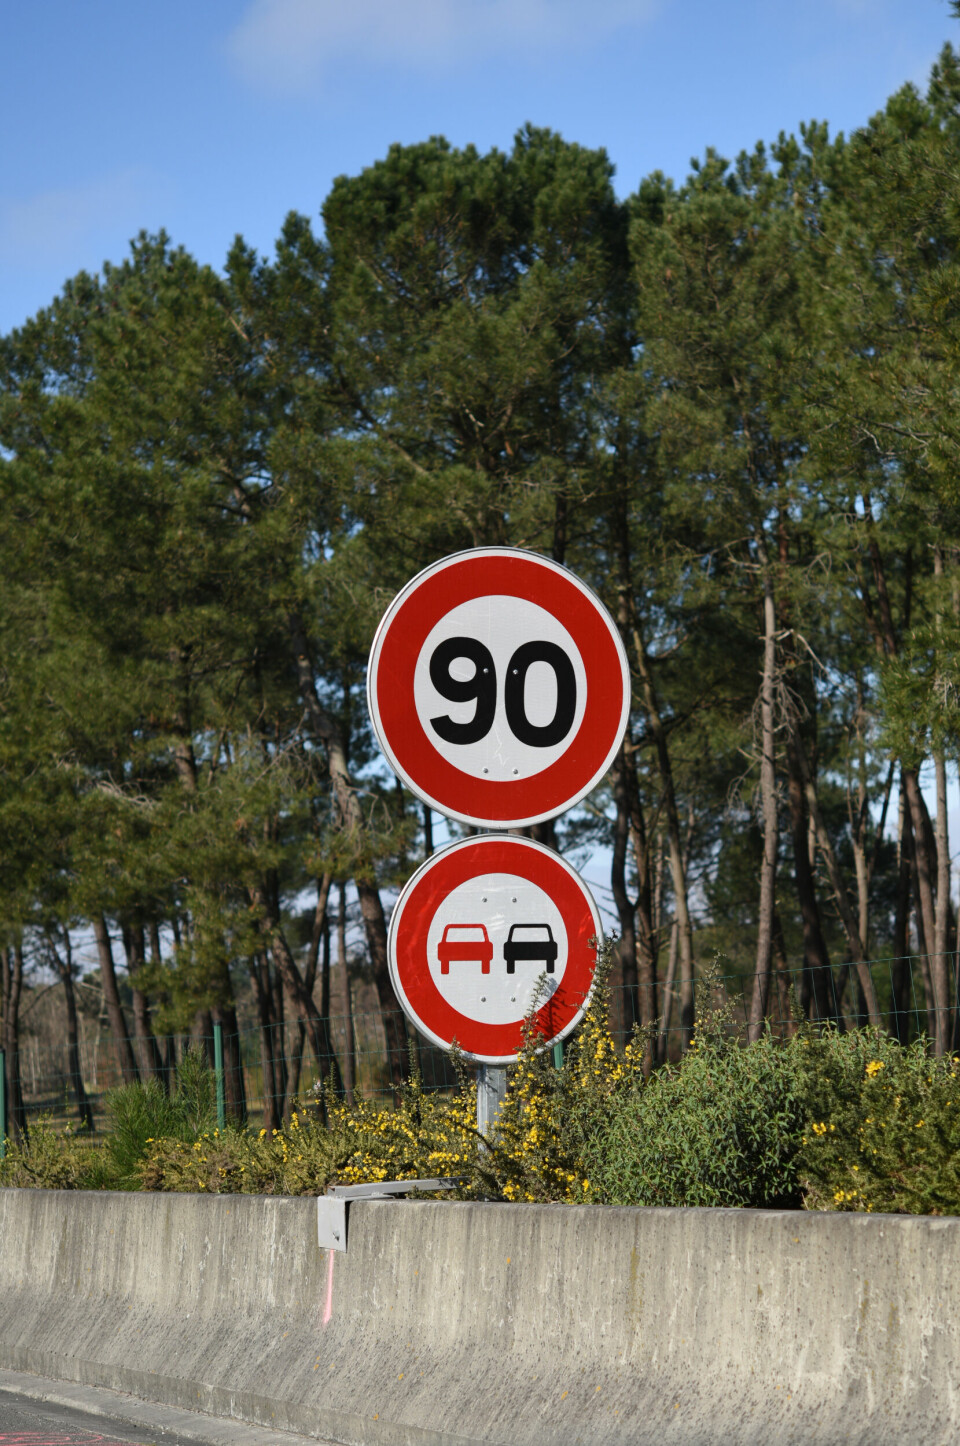 A photo of a 90km/h speed limit sign in France